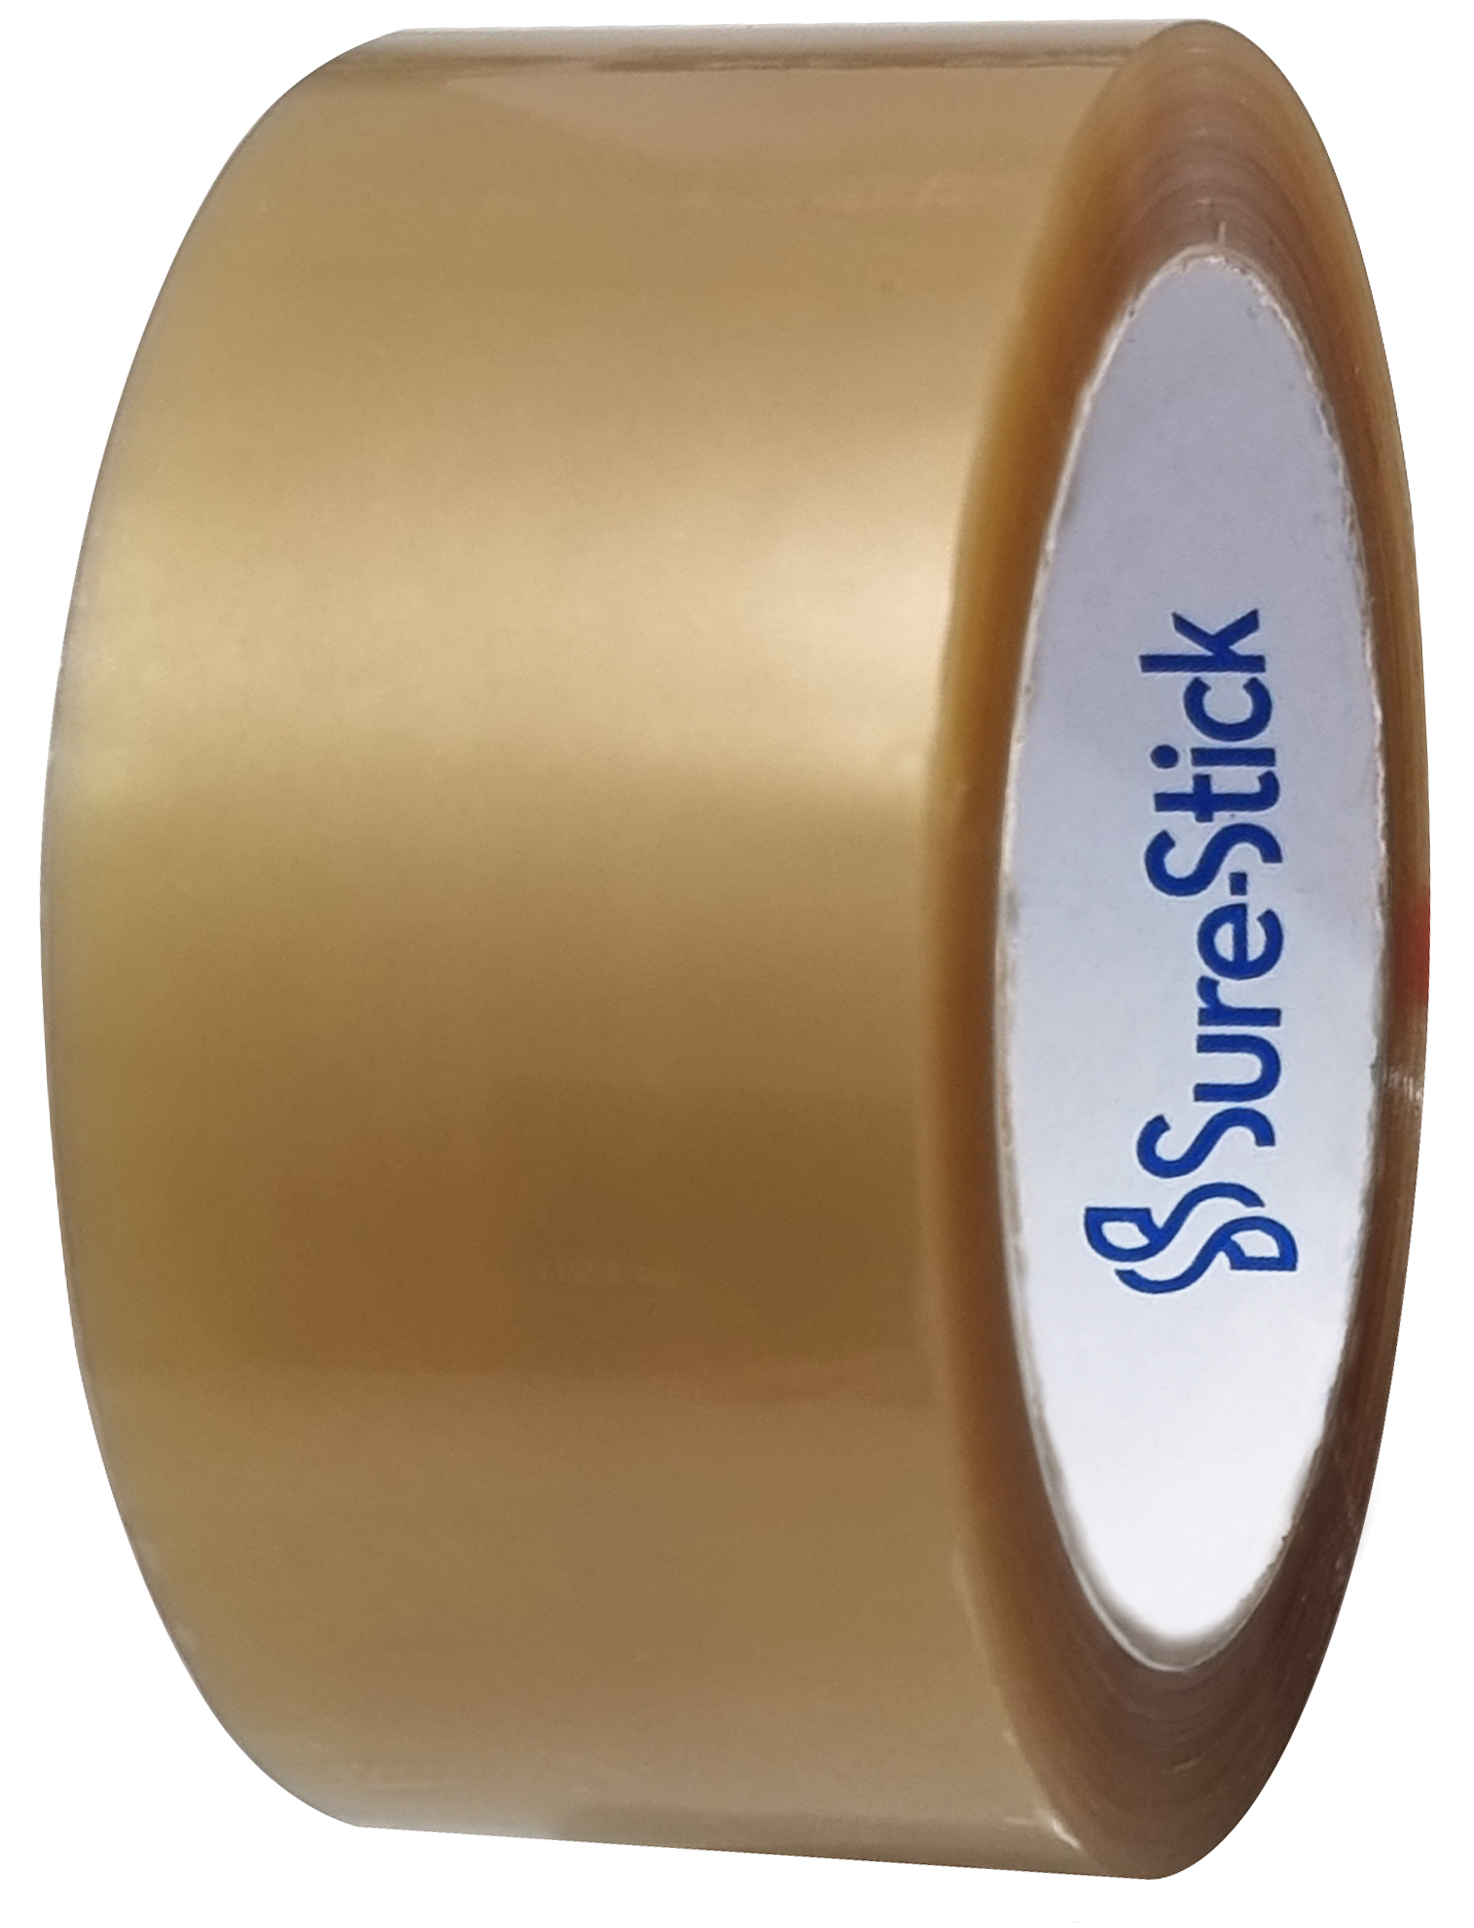 Duck Tape Heavy Duty Packaging Tapes Secure Strong Tape Clear 50mm